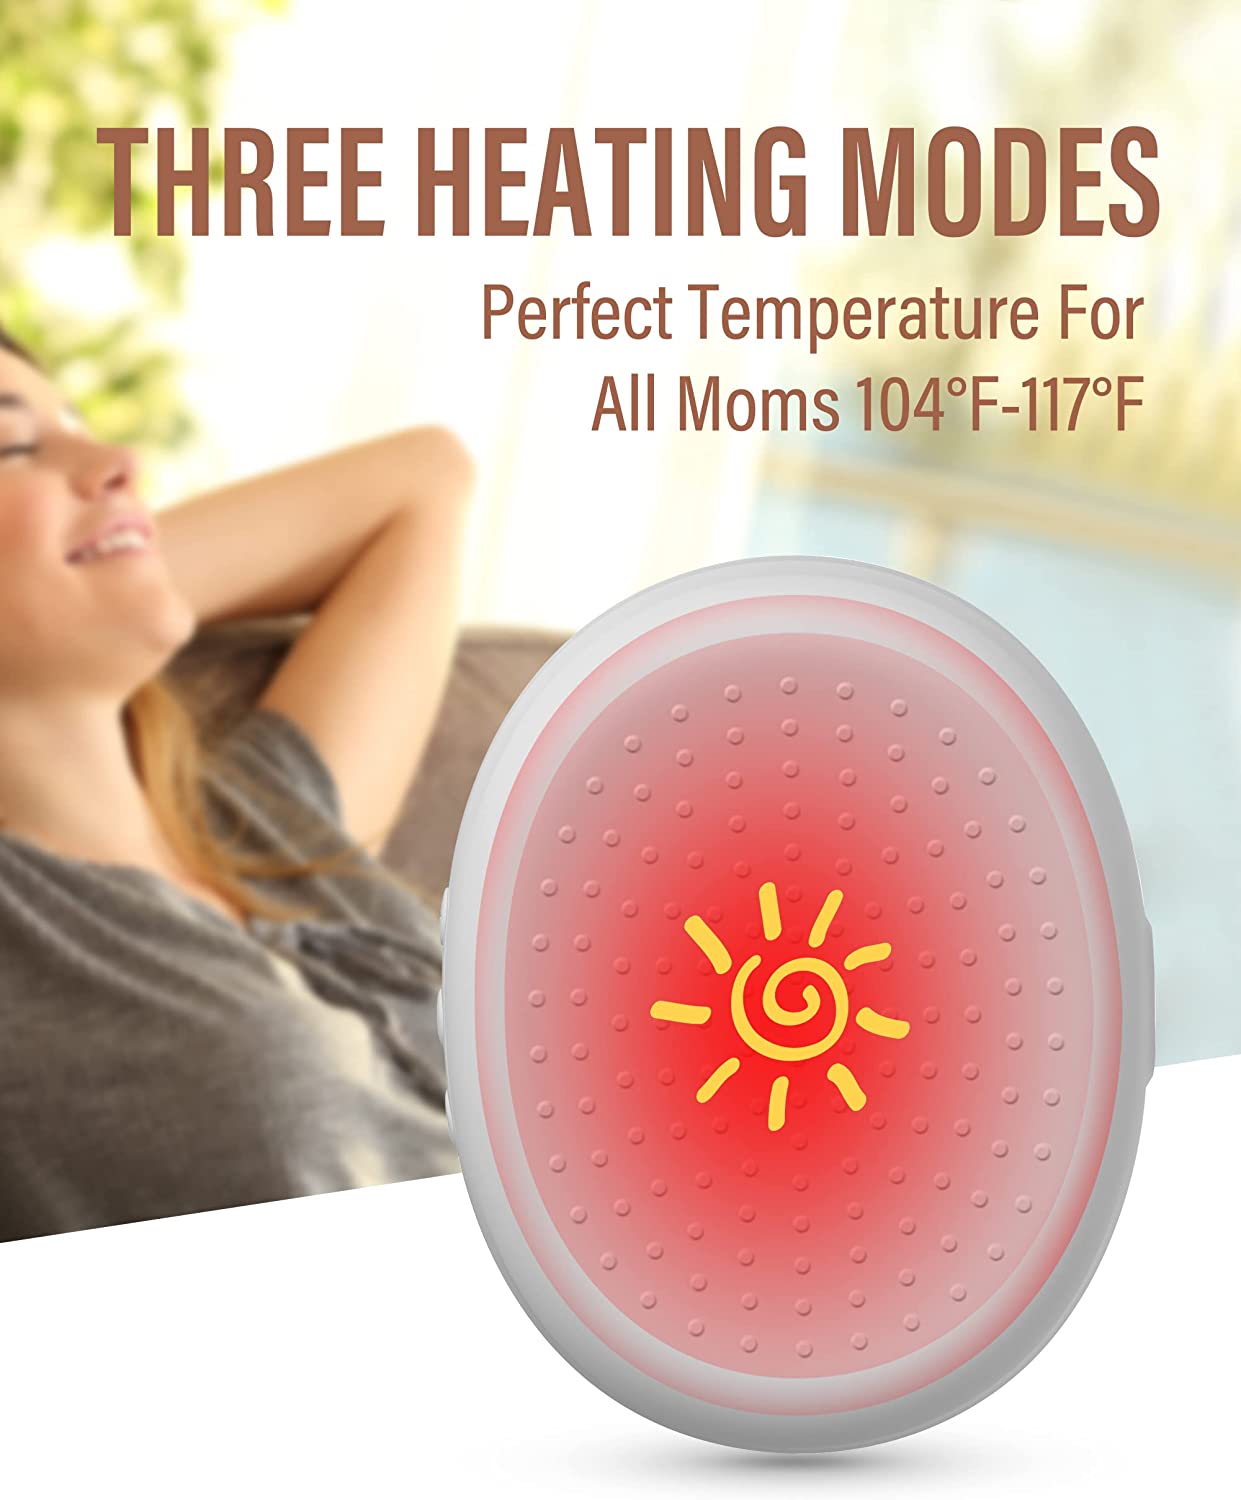 Warming Lactation Massager Soft Silicone Breast Massager for Breastfeeding  Heat + Vibration for Clogged Ducts Improved